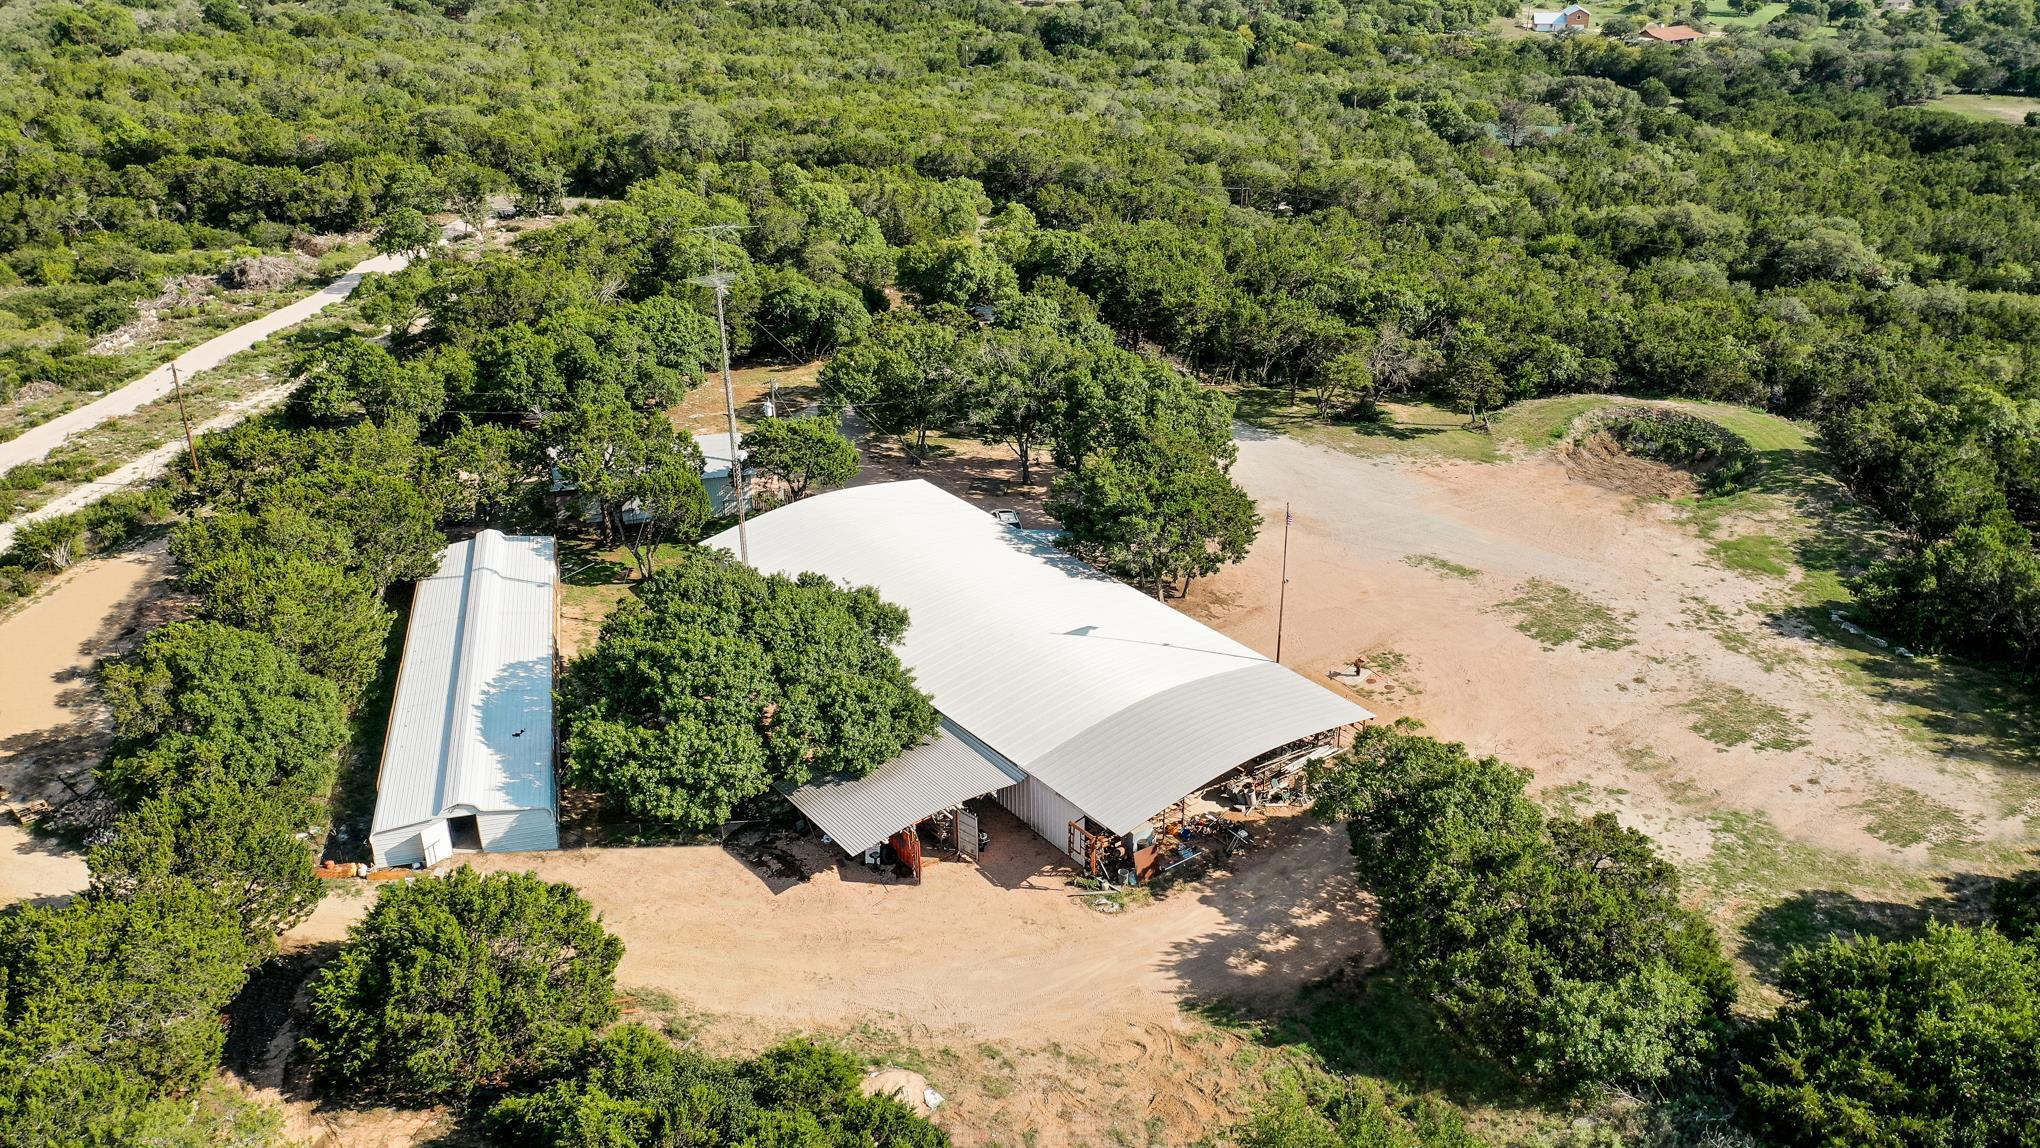 REDUCED $50K! HECK OF A DEAL for a business owner or family compound. Resting on just over 9 private, wooded acres, 2 miles from Burnet, and conveniently located off Hwy 29, this 6,000 square foot bardominium “WORKS.” Combining home and business effortlessly in one convenient building, each run separate meters, 200-amp service, and both are 3,000 square feet. From the entry, step into the large living and dining rooms with a built-in entertainment center and two ceiling fans. The convenient galley kitchen is efficient with granite counters and built-in appliances while the owner suite provides a built-in entertainment center, an on-suite bath, walk-in closet, and convenient access to the laundry closet. A large second bedroom shares the laundry closet, and toward the front of the house, a flex room could serve as an office, craft room, bunk room, or extra storage space. Across from the living room, an oversized third bedroom furnishes additional cabinetry and a convenient half bath. Outdoors, live oaks shade the backyard and the barn adds convenient storage. A FEMA-style trailer with 50-amp service, grinder pumps, and dedicated washer/dryer hookups provide further accommodation. Shop has two double sliding garage doors and 3 roll up doors. Septic with 1500 gallon holding tank & pump south of the shop (new pump installed 3 yrs. ago); drain field west of the house: 40’x48’. RV hookup next to the well house (well 280’ deep) offers 50-amp hookup. House has two 50-gal hot water heaters, installed in-line & 4-z